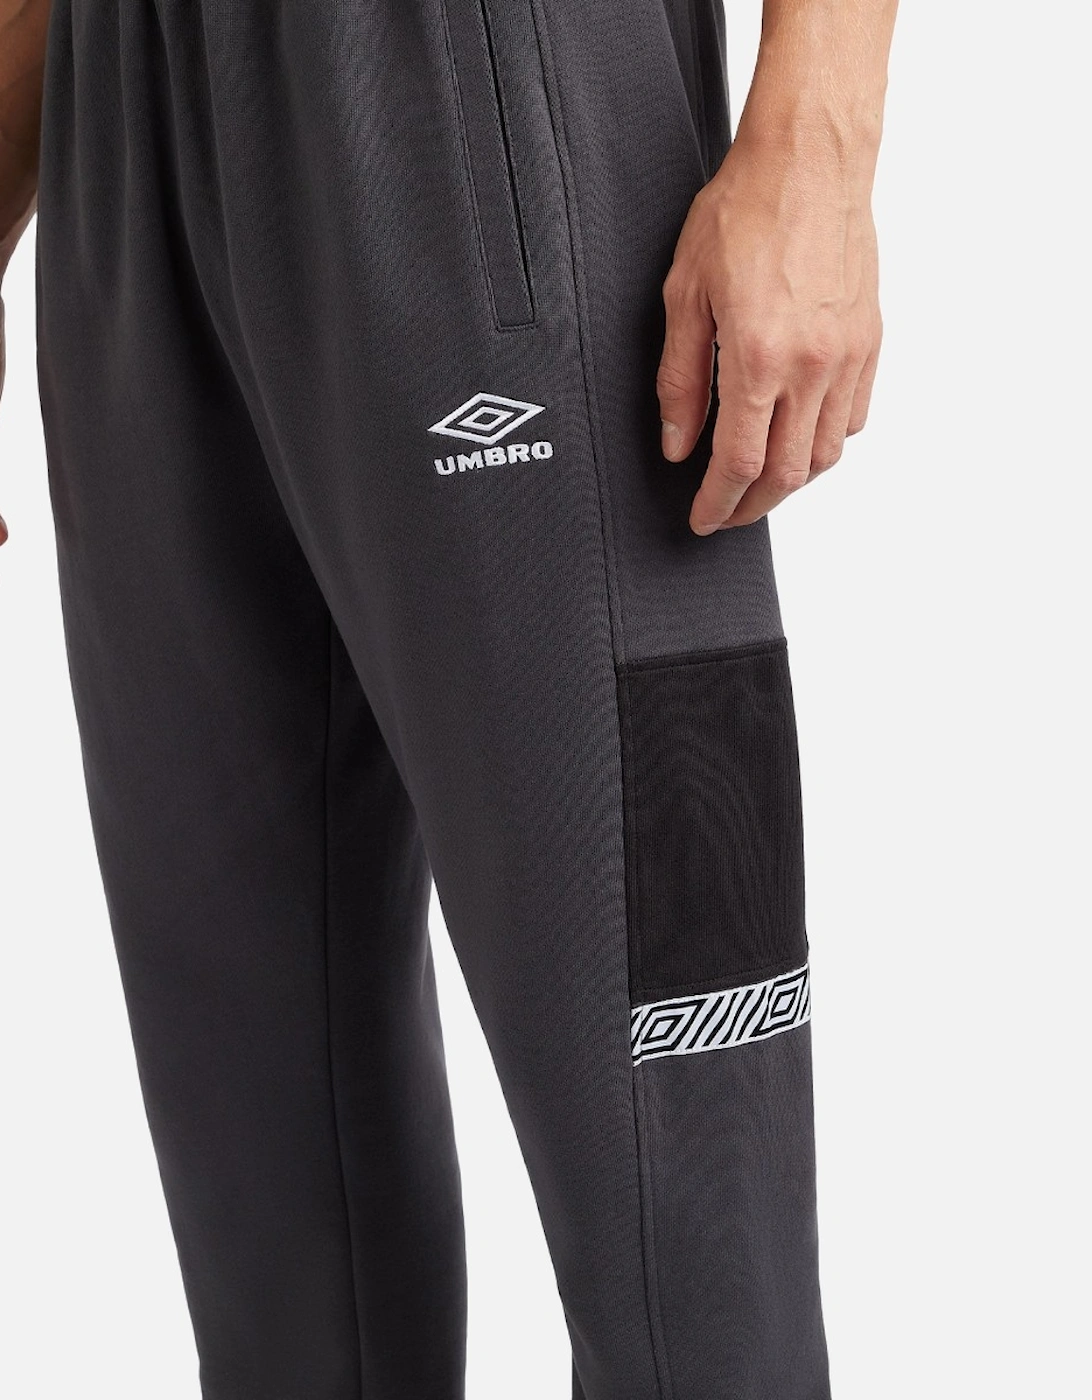 Mens Sports Style Club Jogging Bottoms